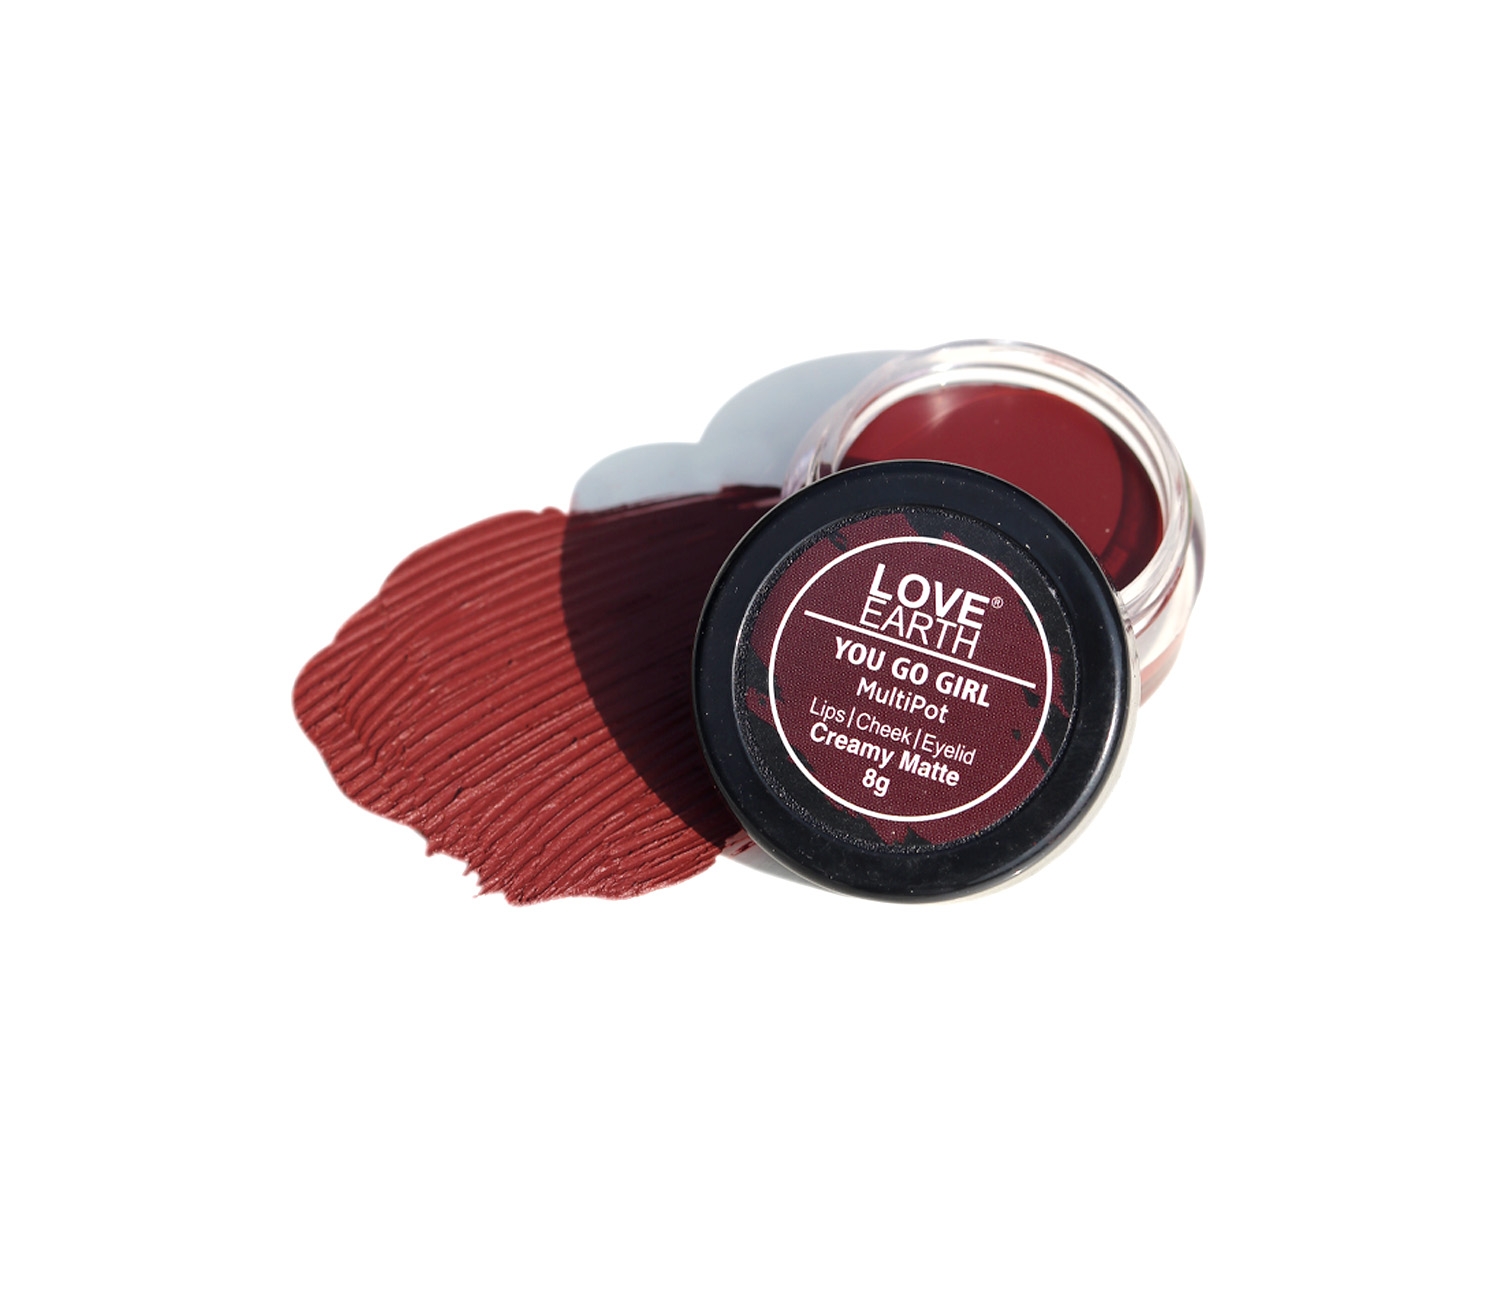 LOVE EARTH | Love Earth Lip Tint & Cheek Tint Multipot - You Go Girl With Vitamin E And Essential Oils For Lips, Eyelids And Cheeks, Creamy Matte - Wine